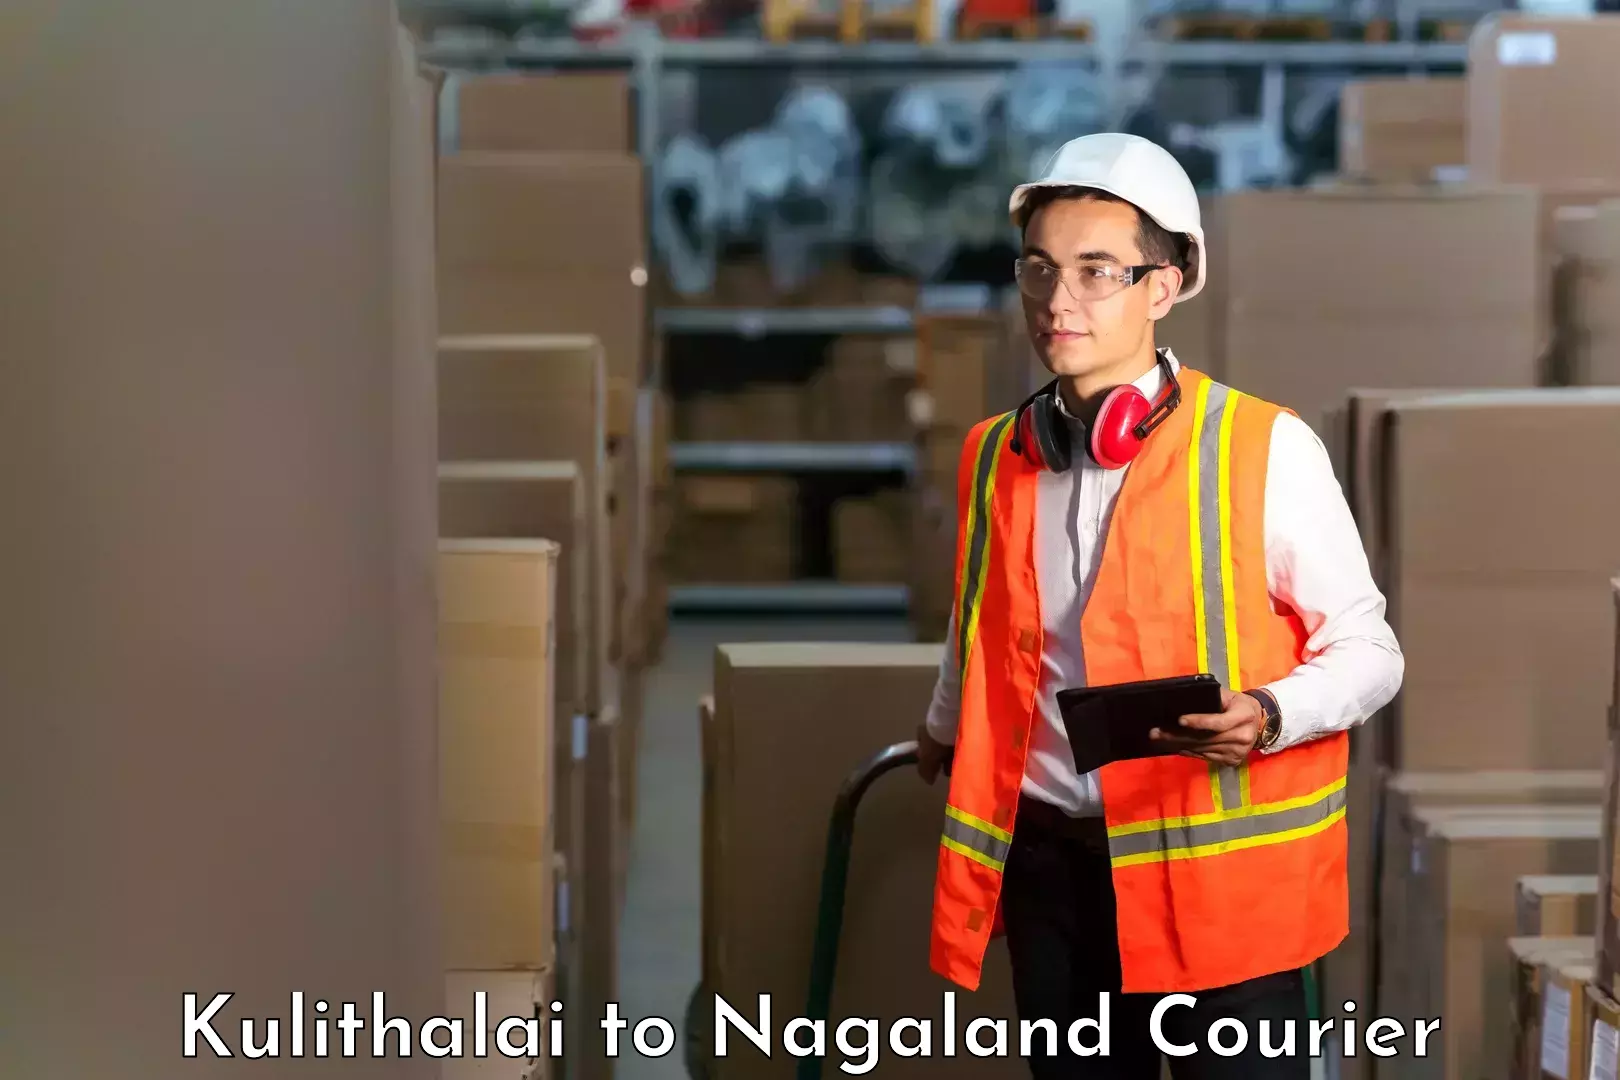 Reliable delivery network Kulithalai to NIT Nagaland